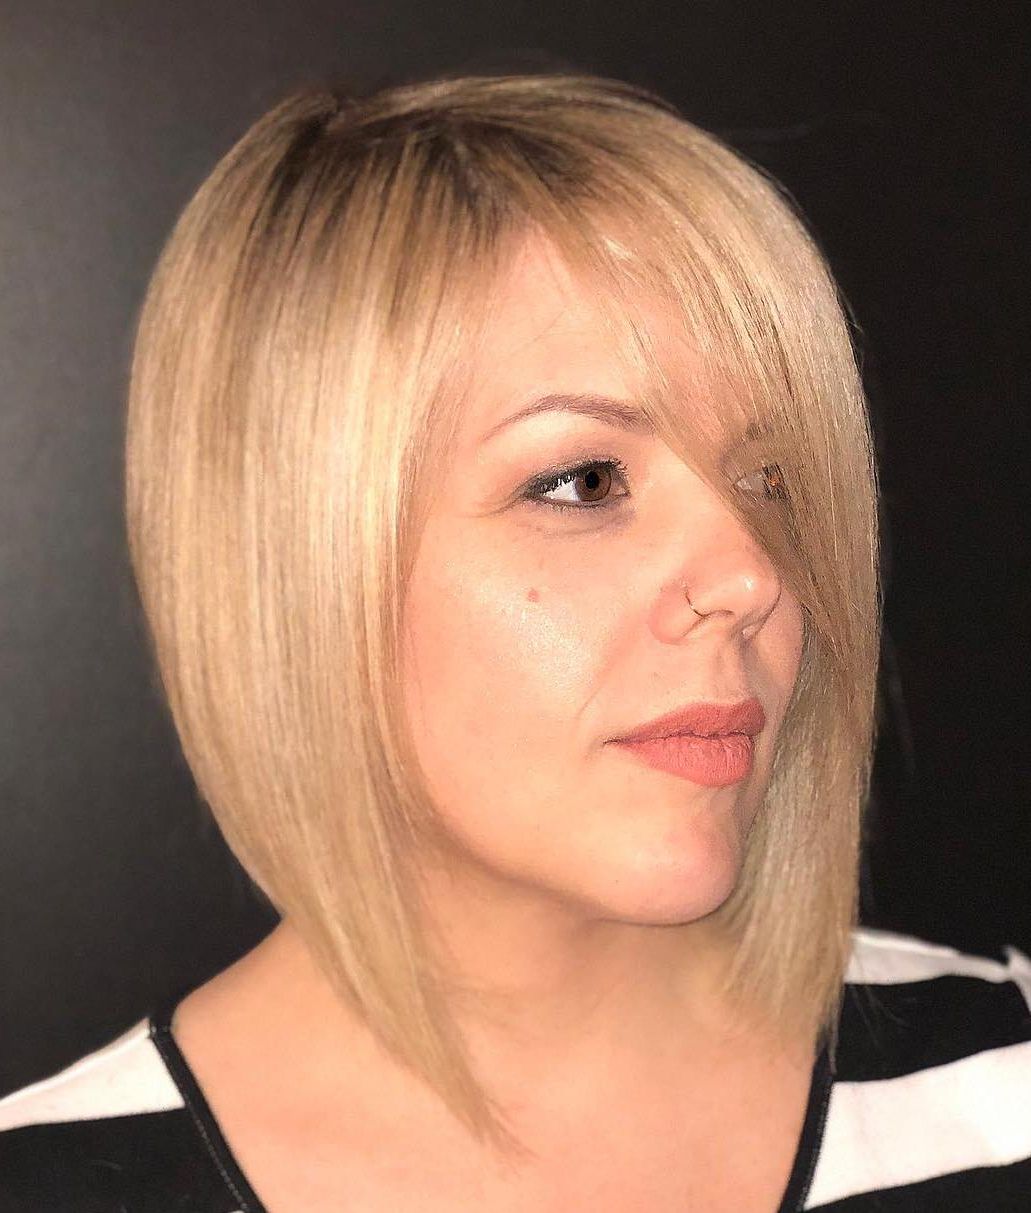 The Most Instagrammable Hairstyles With Bangs In 2019 Regarding 2017 Strawberry Blonde Bob Hairstyles With Flipped Ends (View 9 of 20)